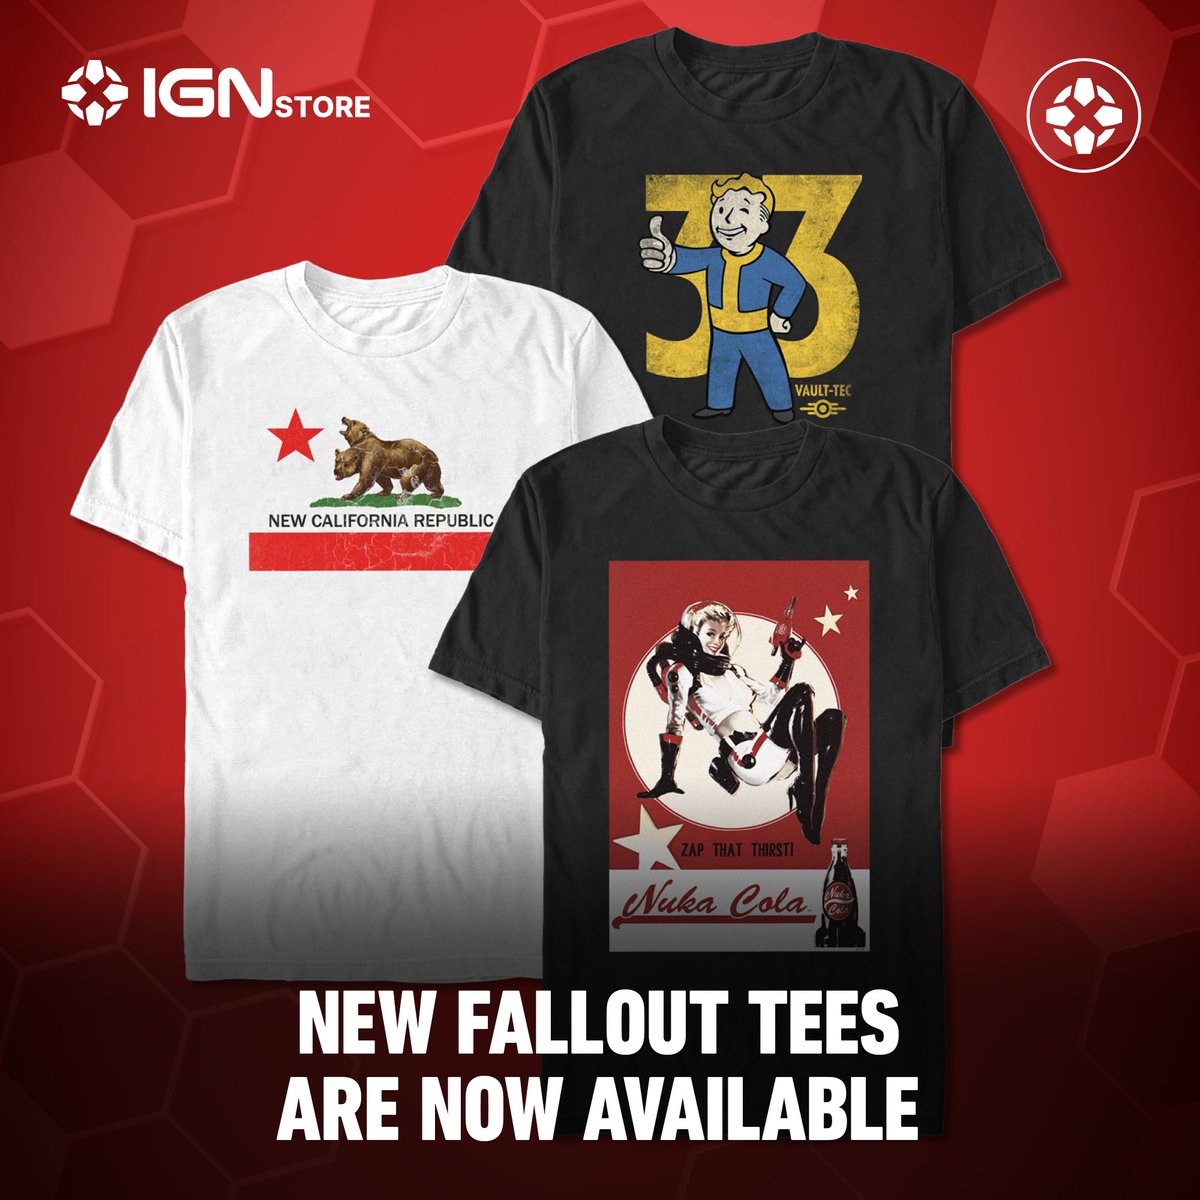 You can buy new tees inspired by the Fallout universe on IGN Store! Gear up for the wasteland! Represent the New California Republic, your favorite post-apocalyptic soda, and more. store.ign.com/collections/fa…